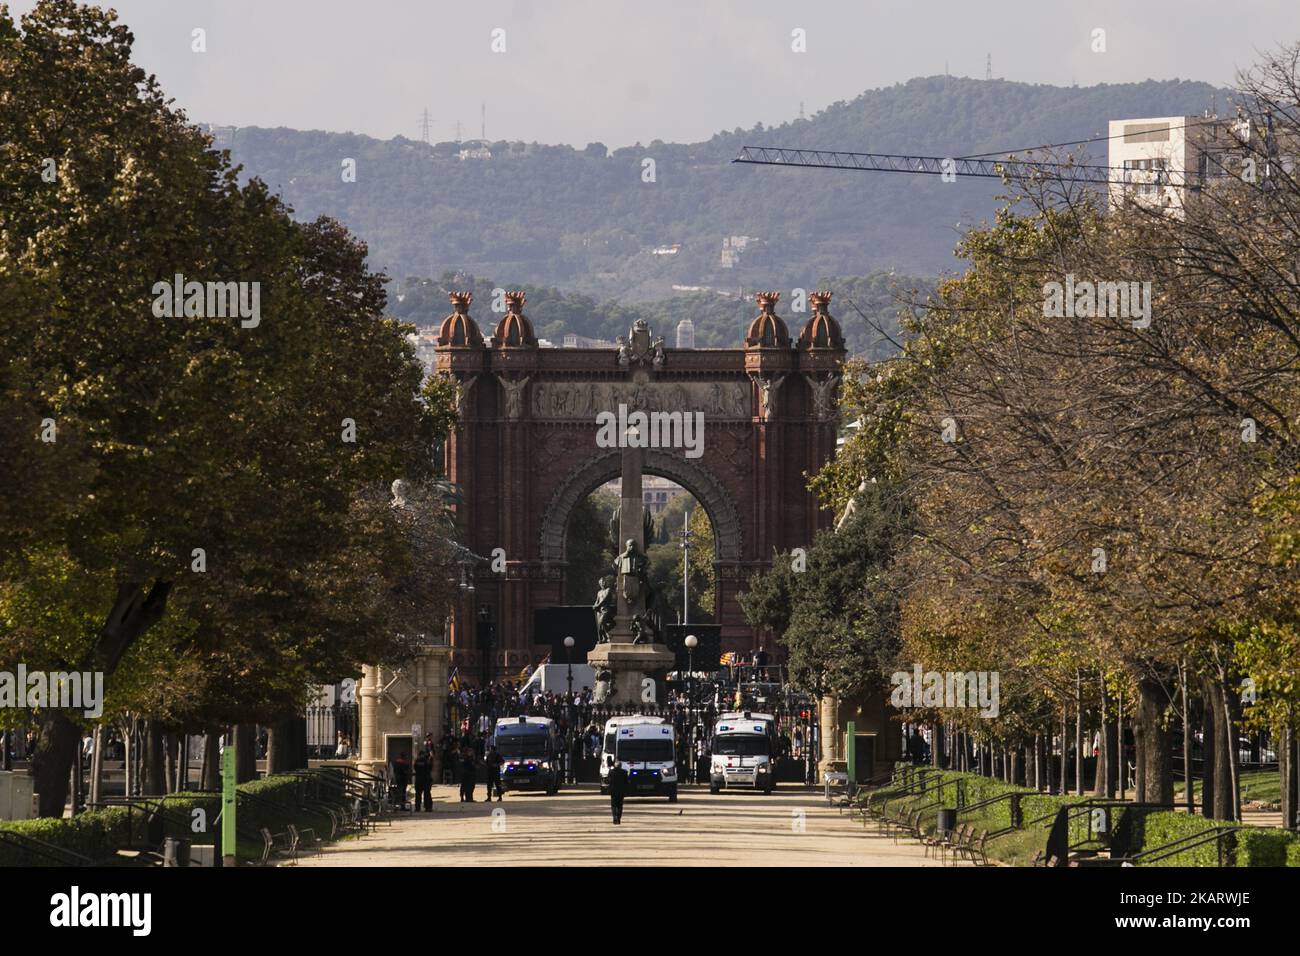 The Catalan Police Mossos d'Esquadra closes all the entrances to Ciutadella Park, to ensure the Parliament is located. Catalonia President Carles Puigdemont could declare the independence of Catalonia. In Barcelona on October 10 of 2017. (Photo by Xavier Bonilla/NurPhoto) Stock Photo